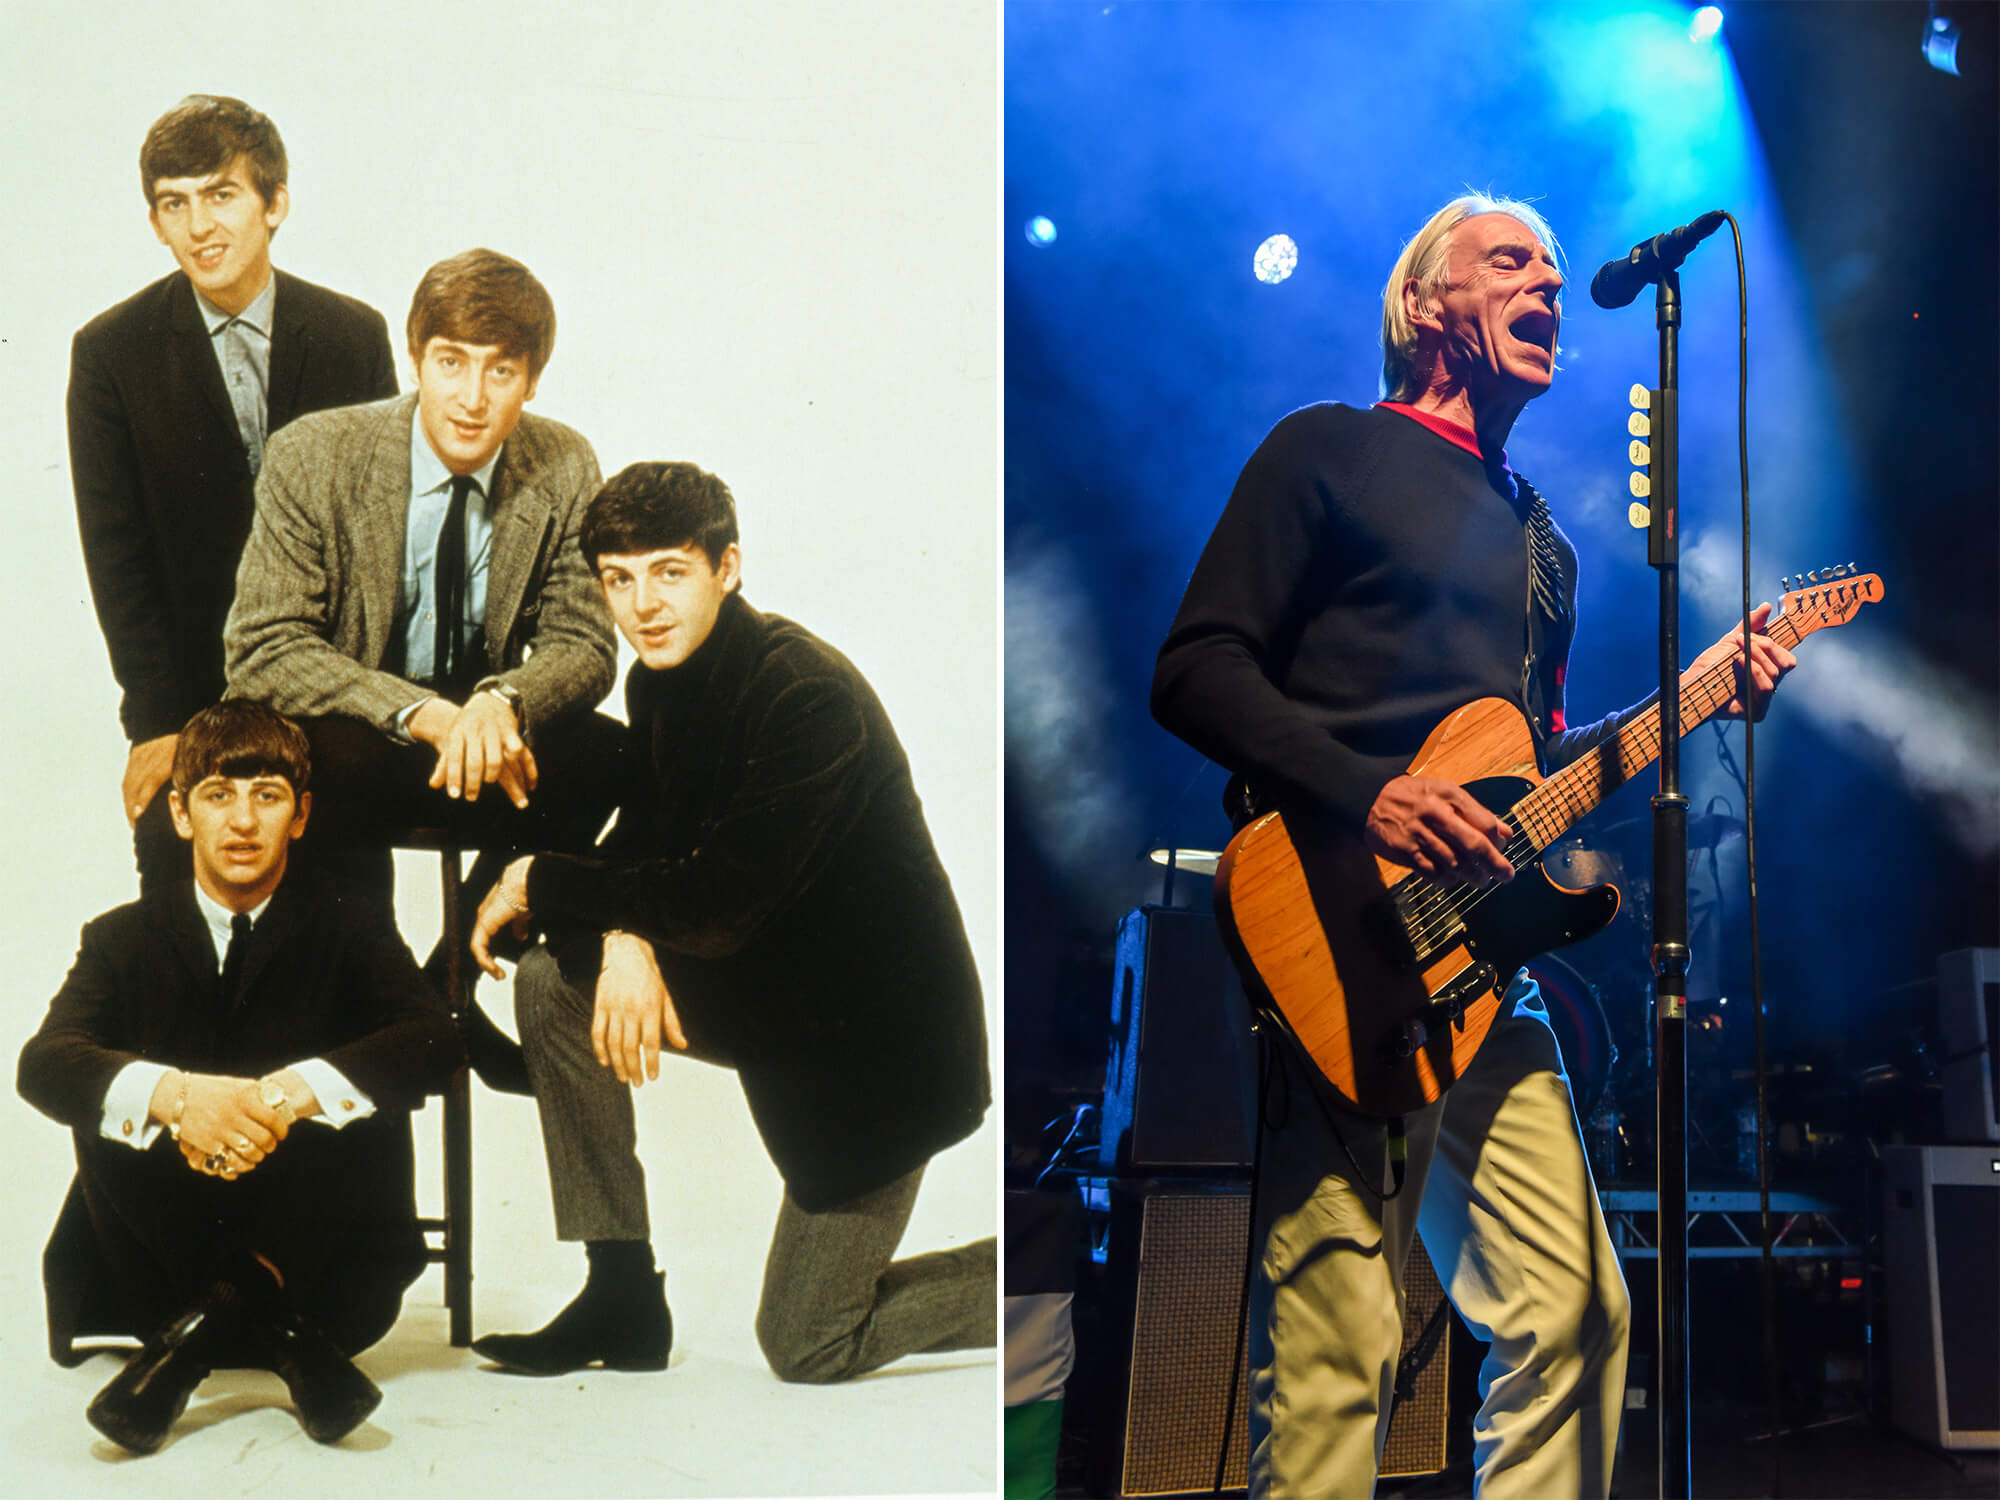 The Beatles pictured together (left) and Paul Weller captured on stage playing guitar (right)